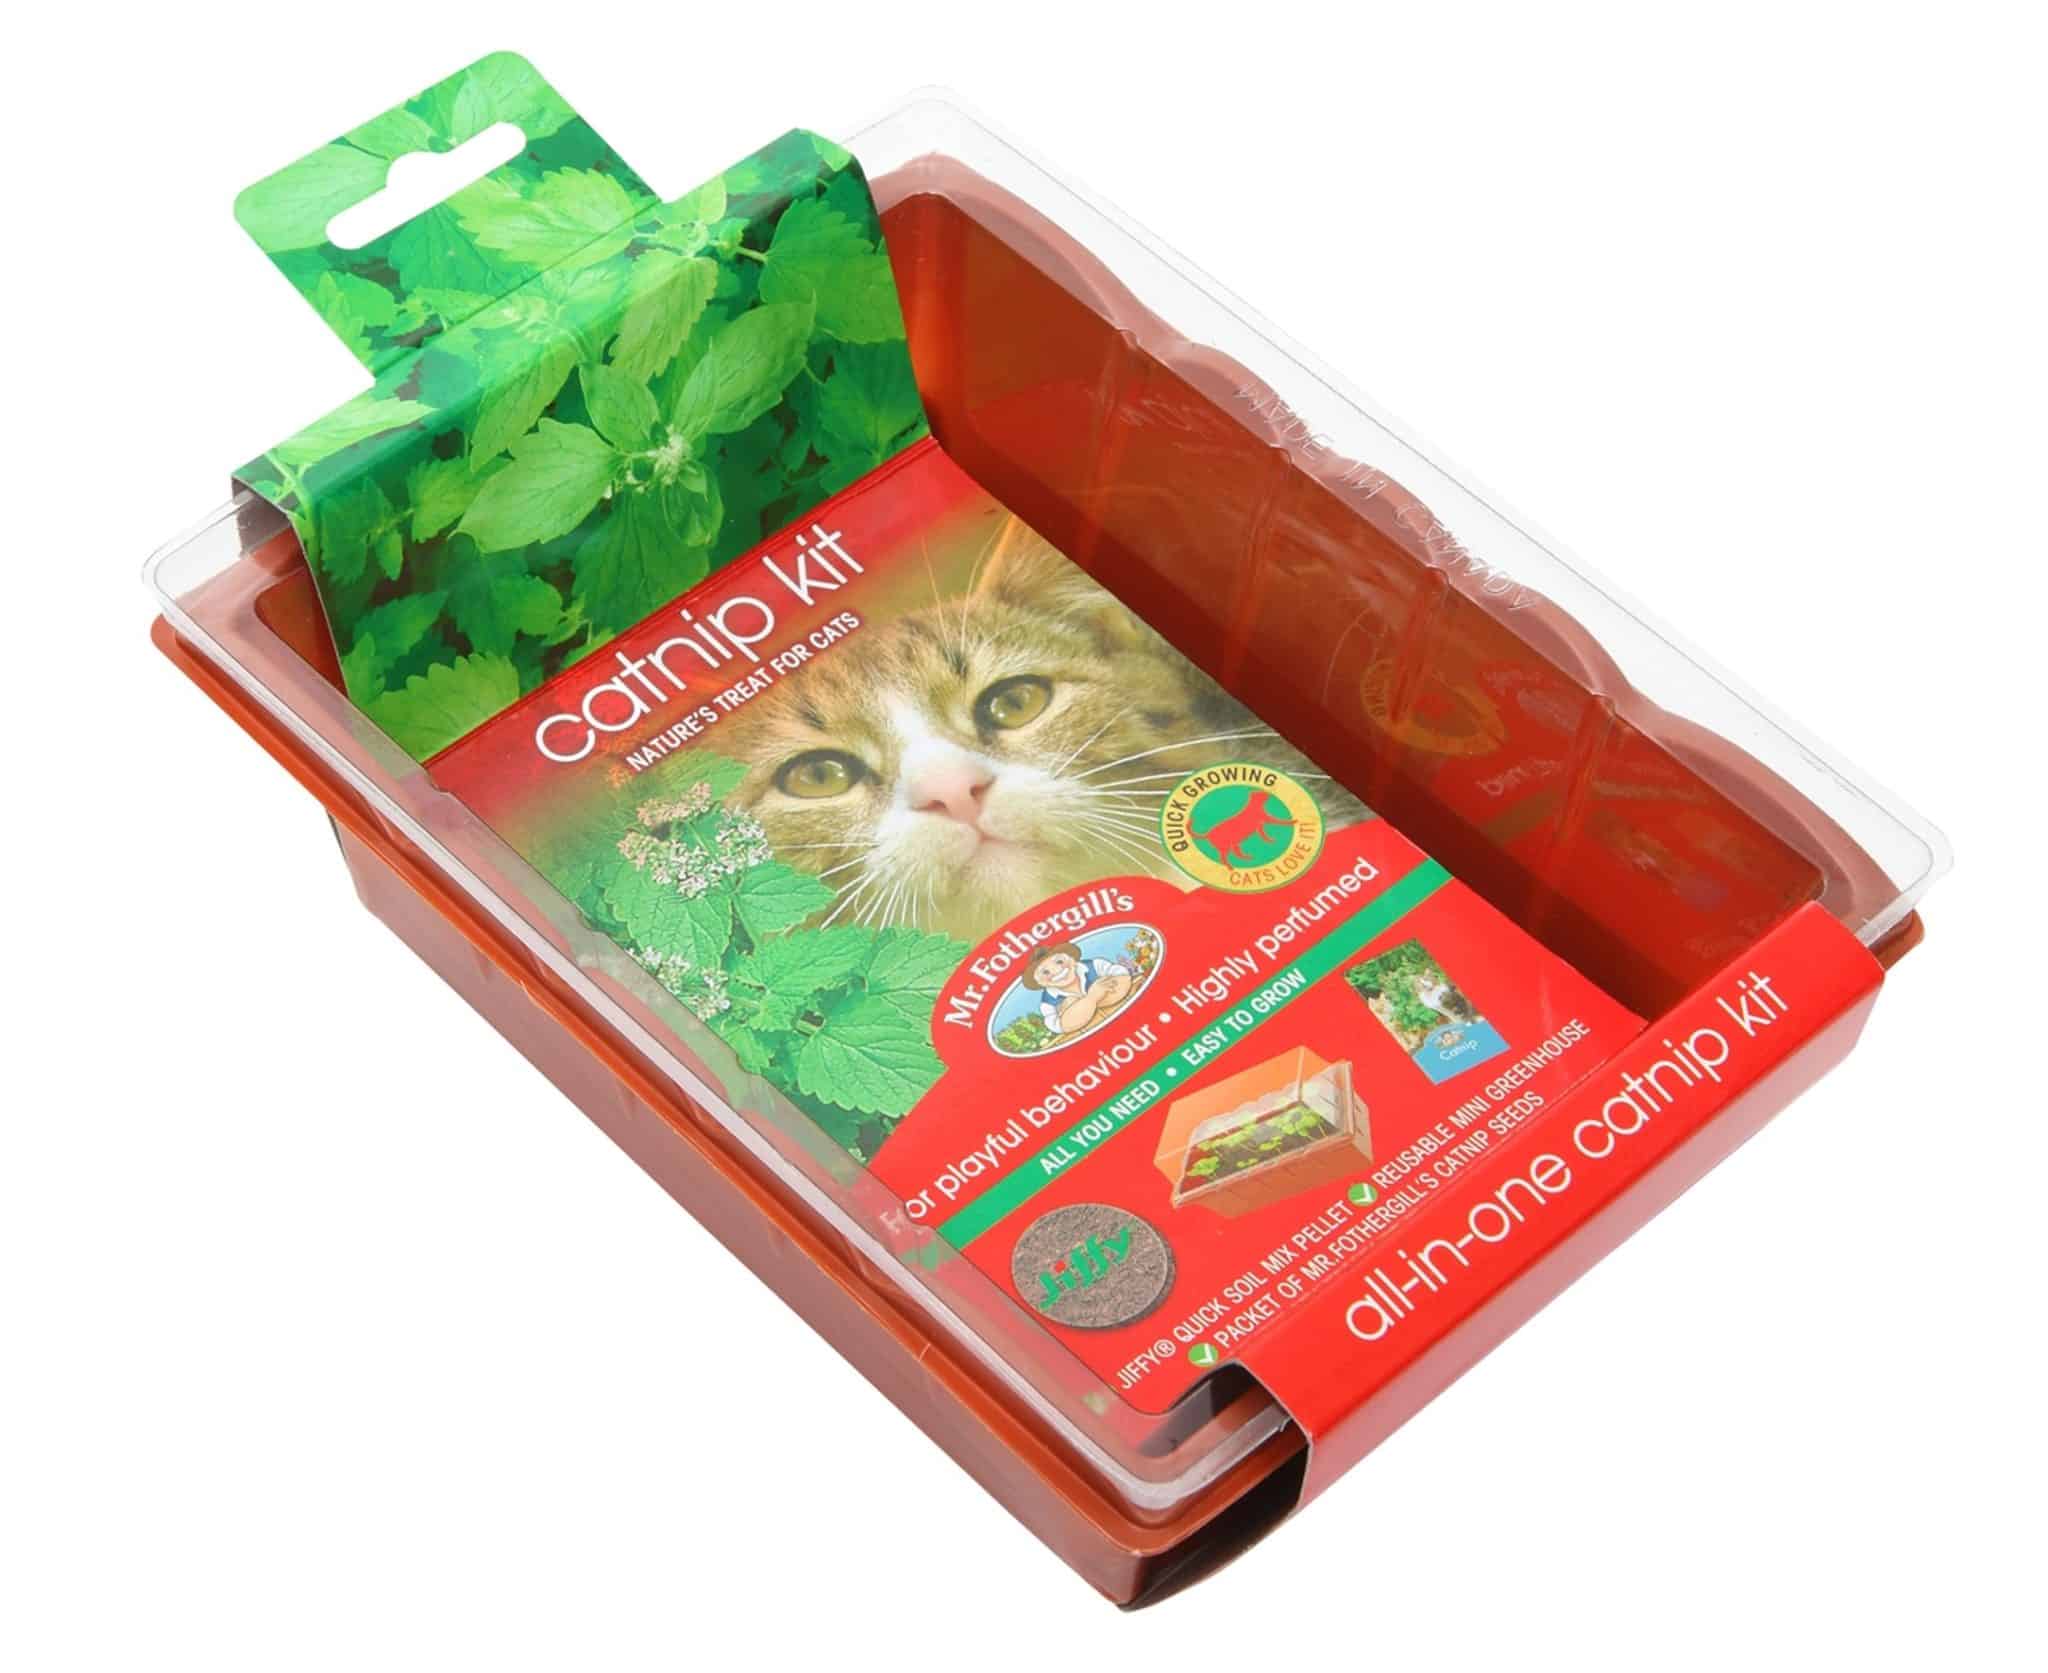 Great Christmas gift ideas for cats - Pets4Life